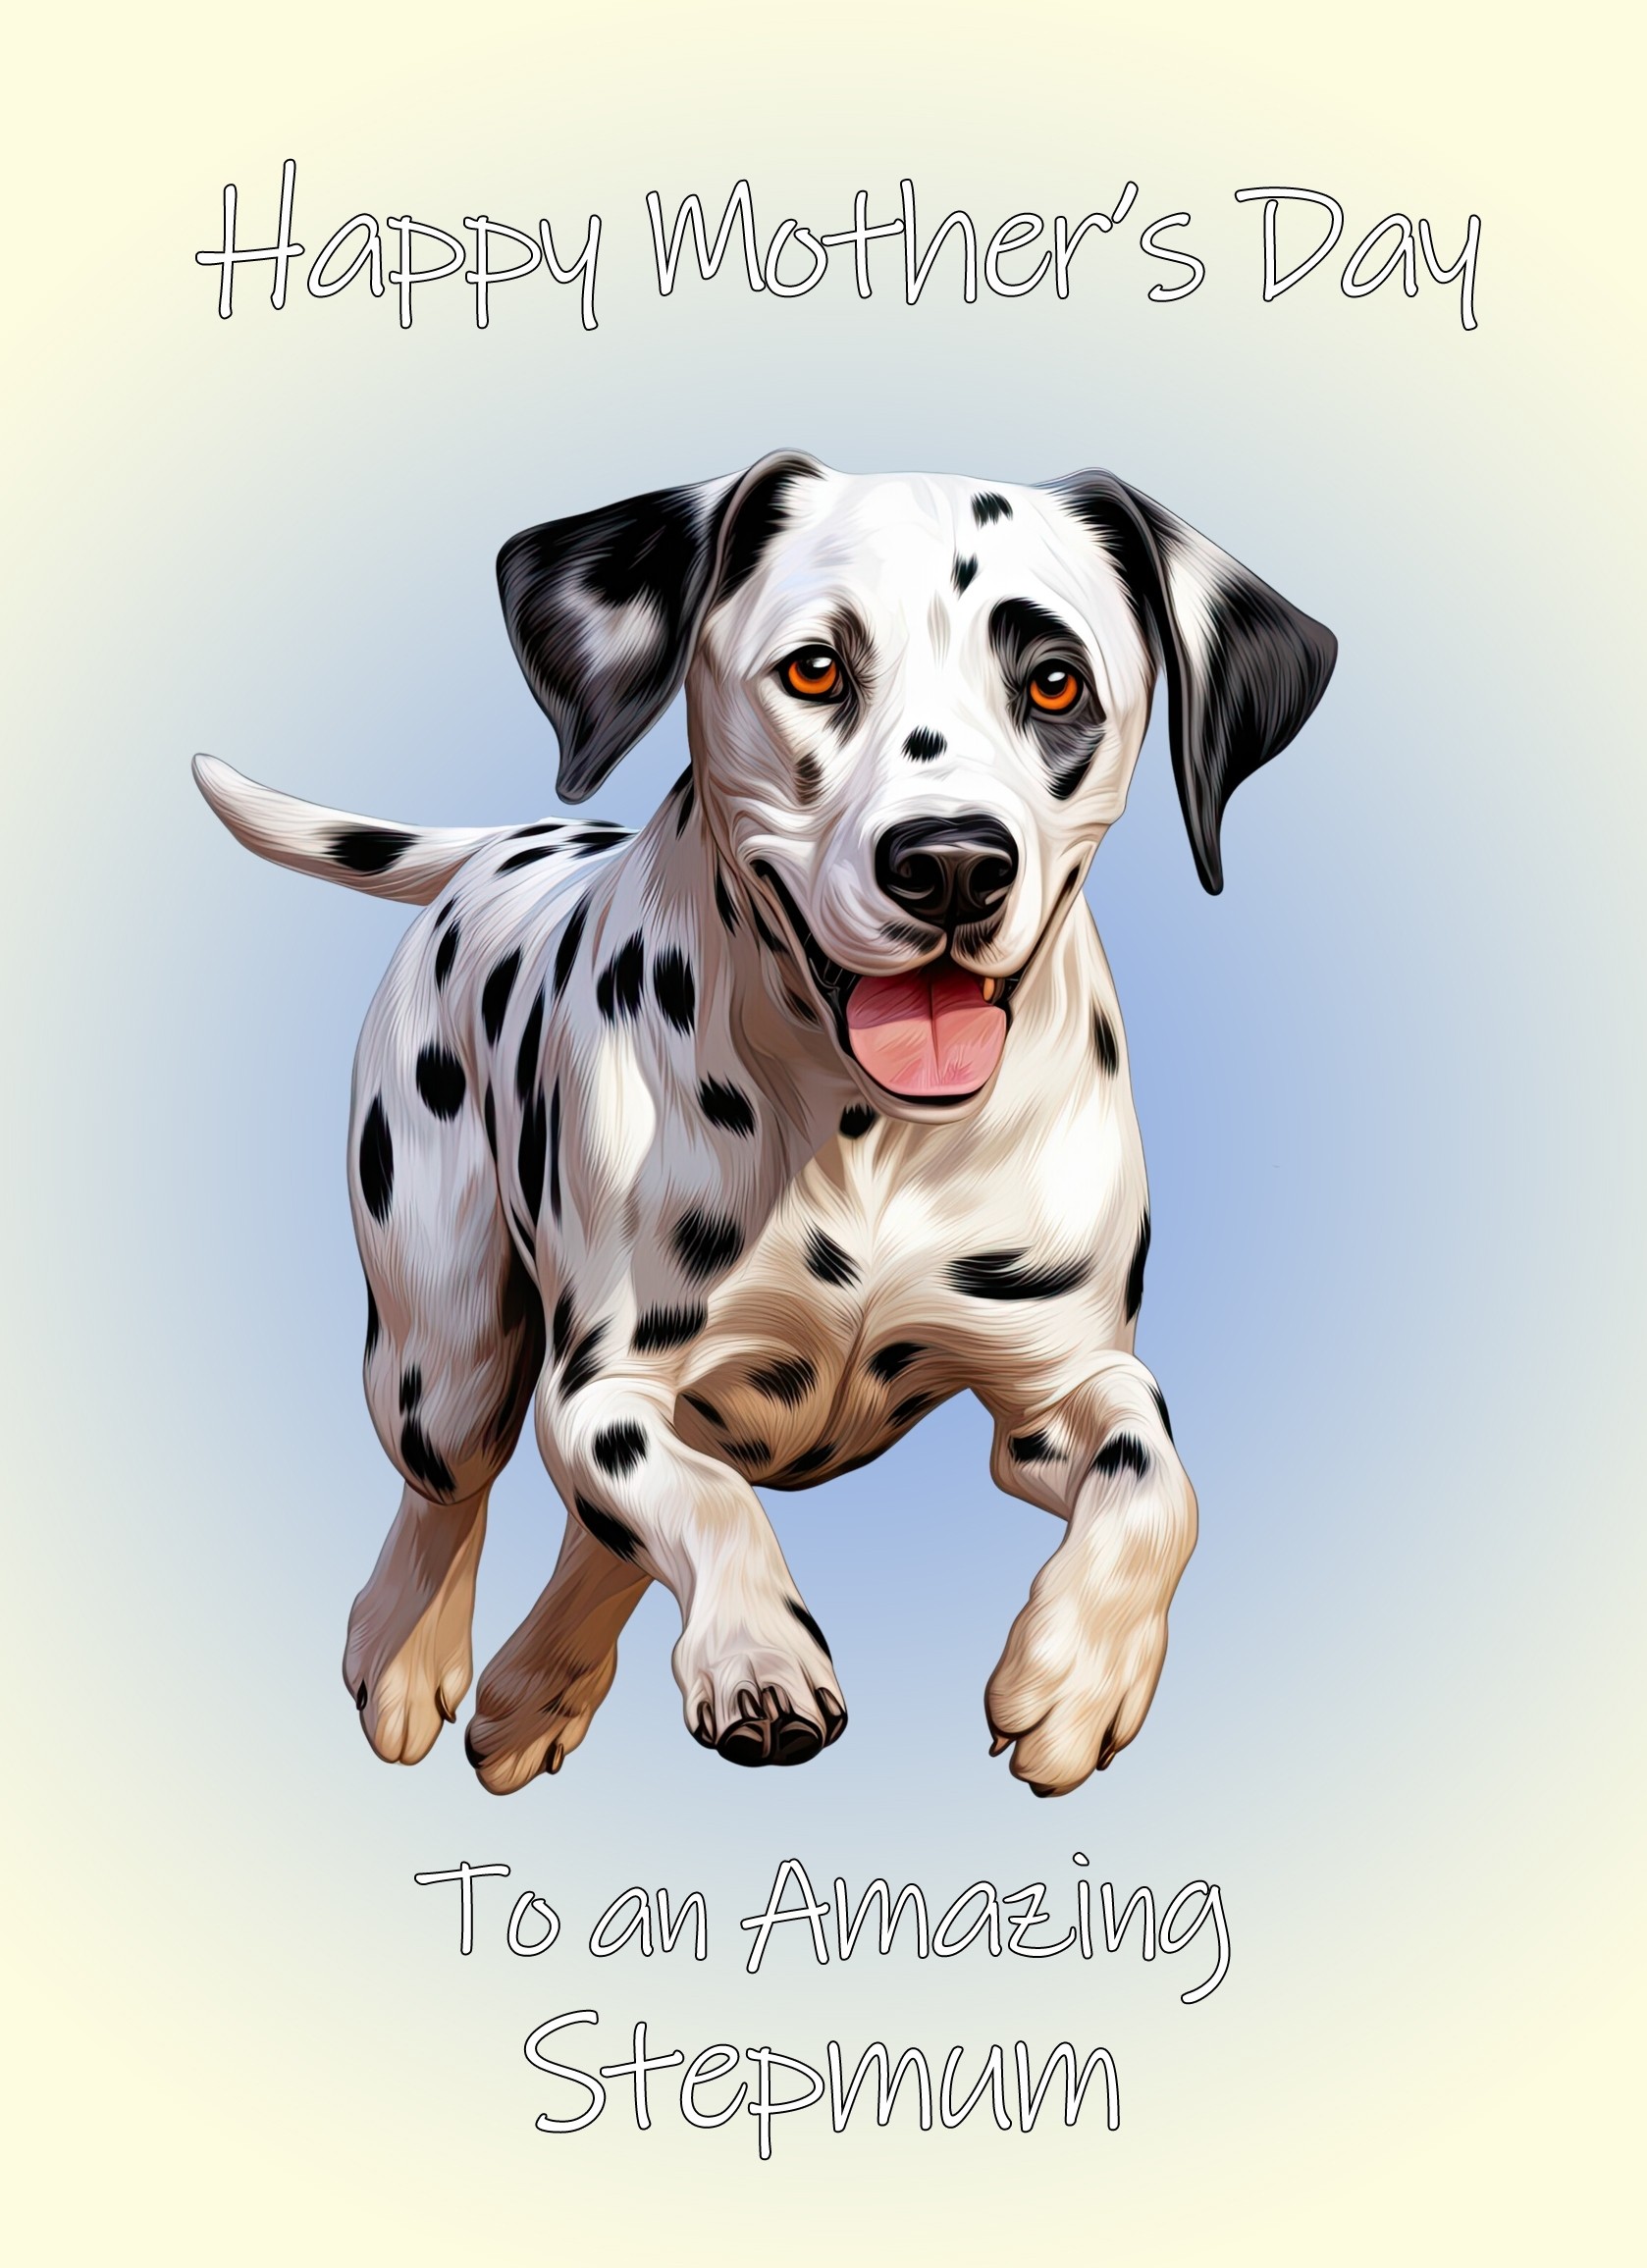 Dalmatian Dog Mothers Day Card For Stepmum